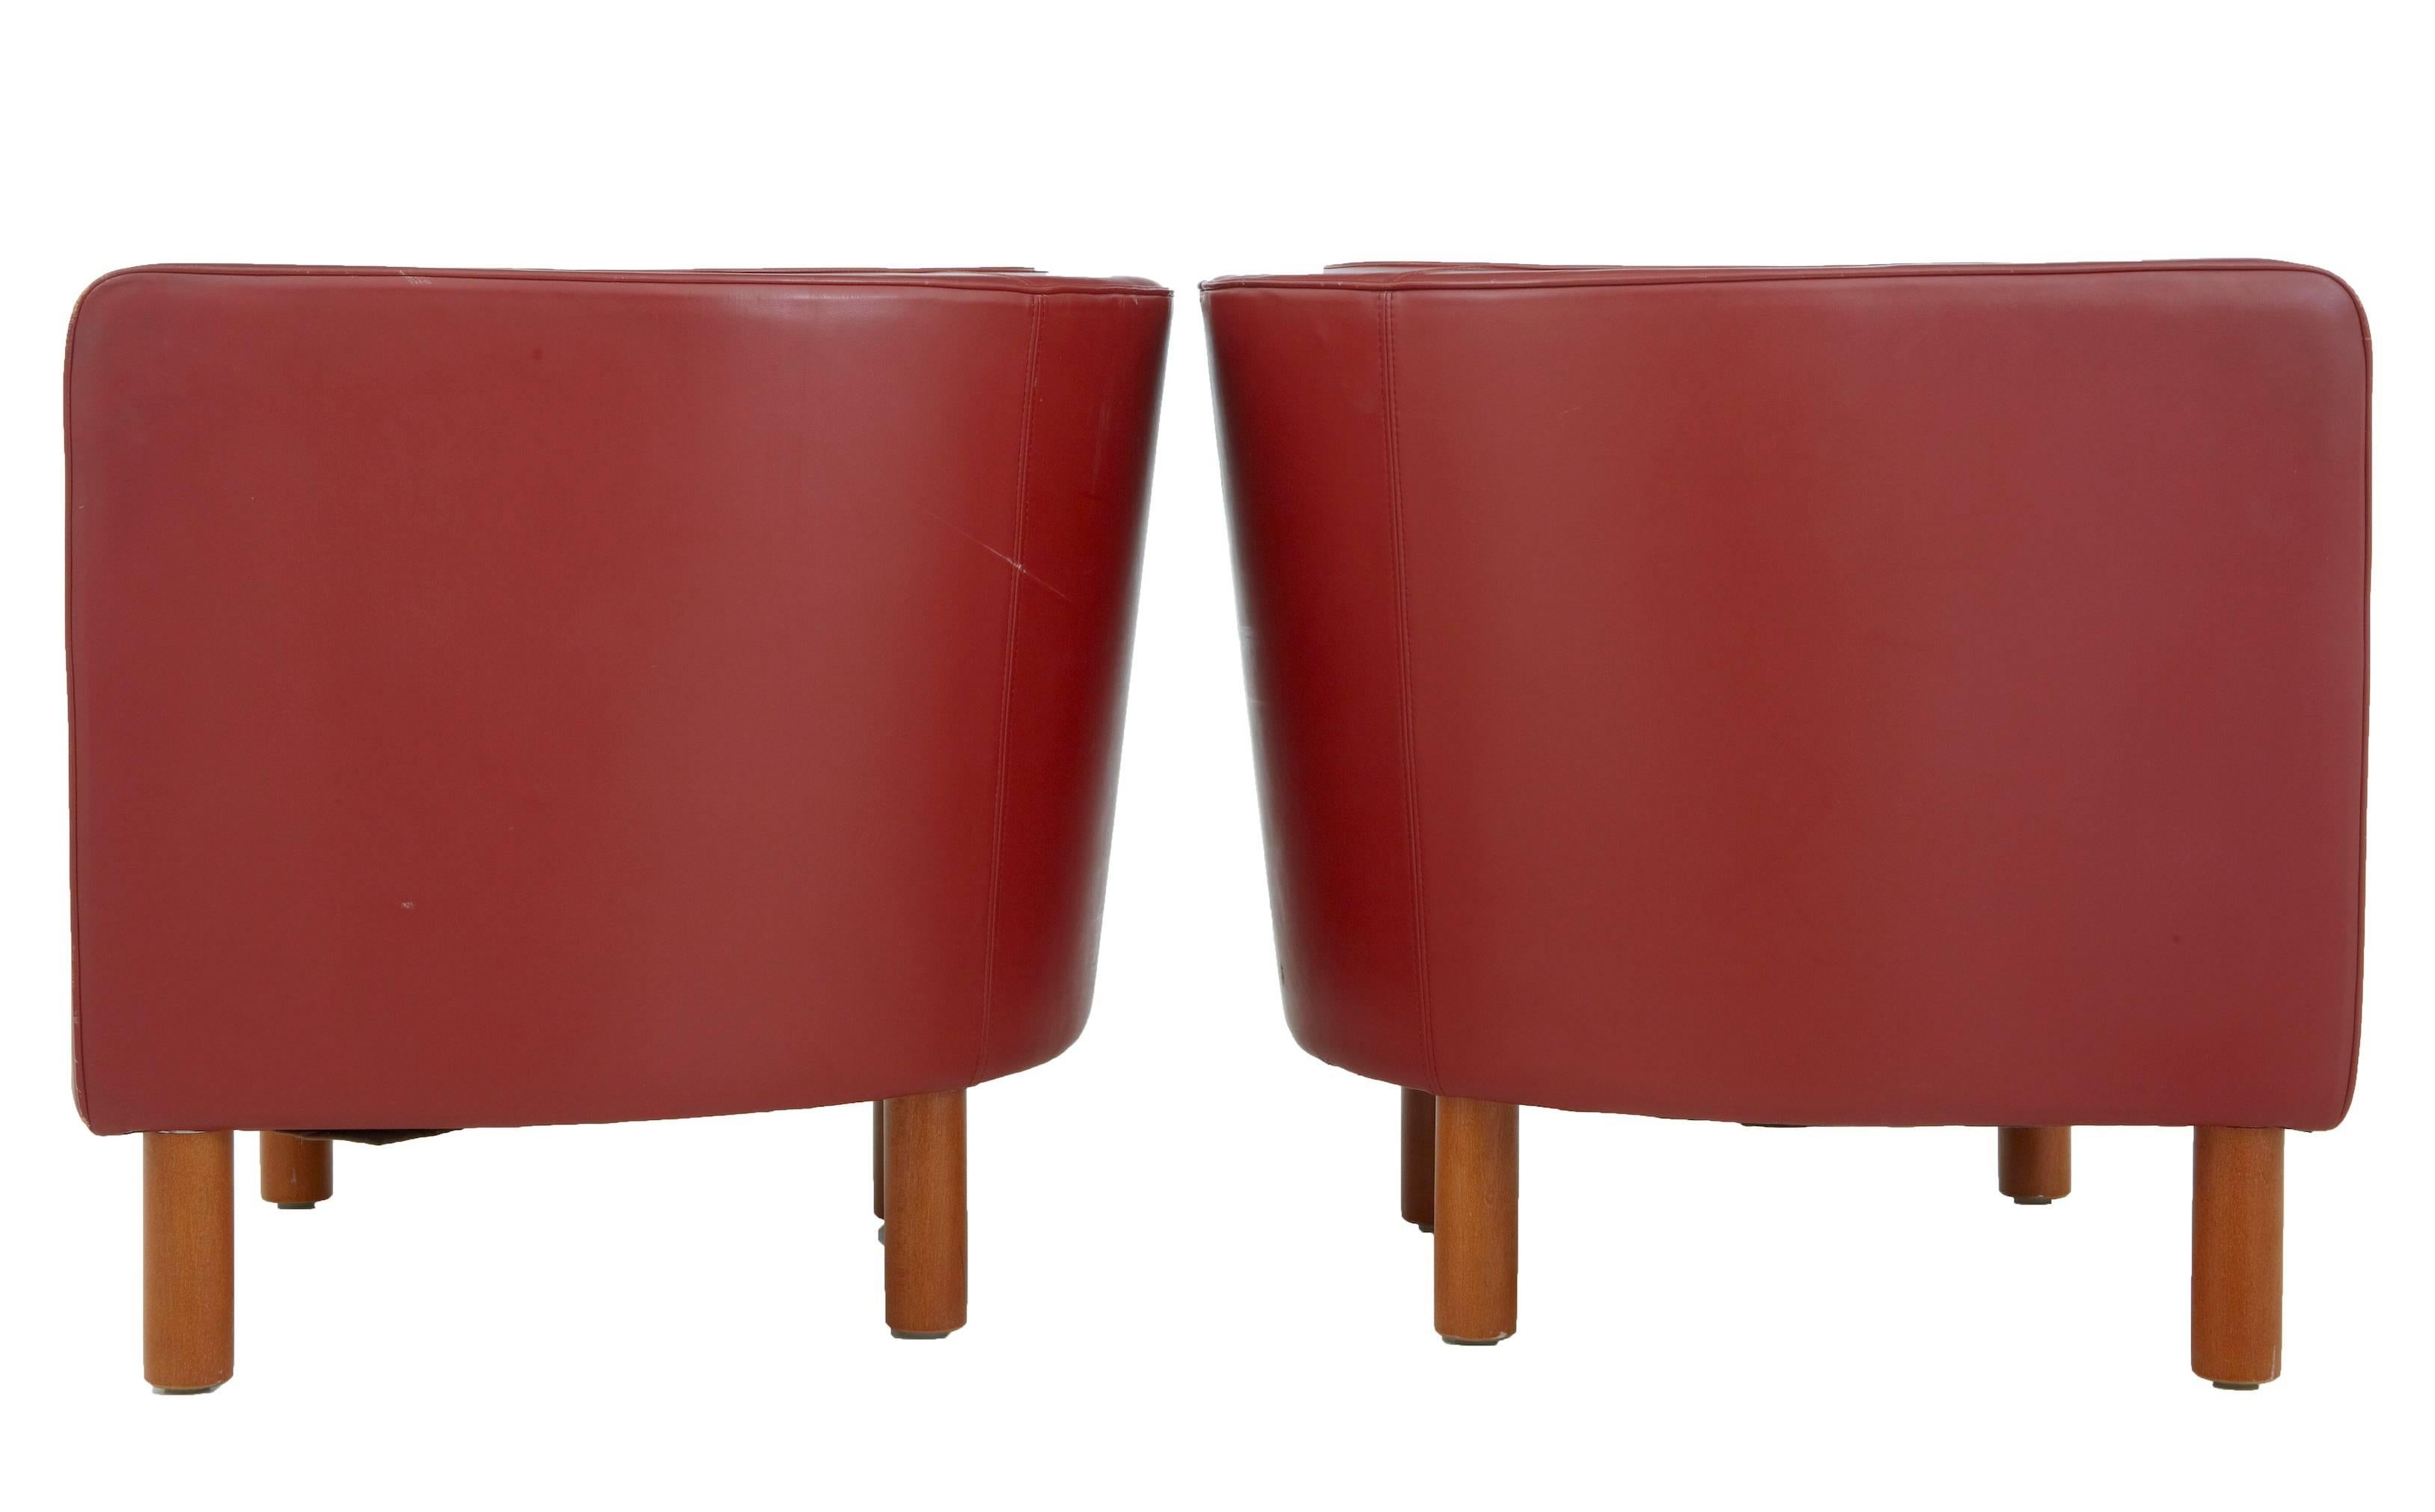 Scandinavian Modern Pair of Large, 1970s Red Leather Club Armchairs